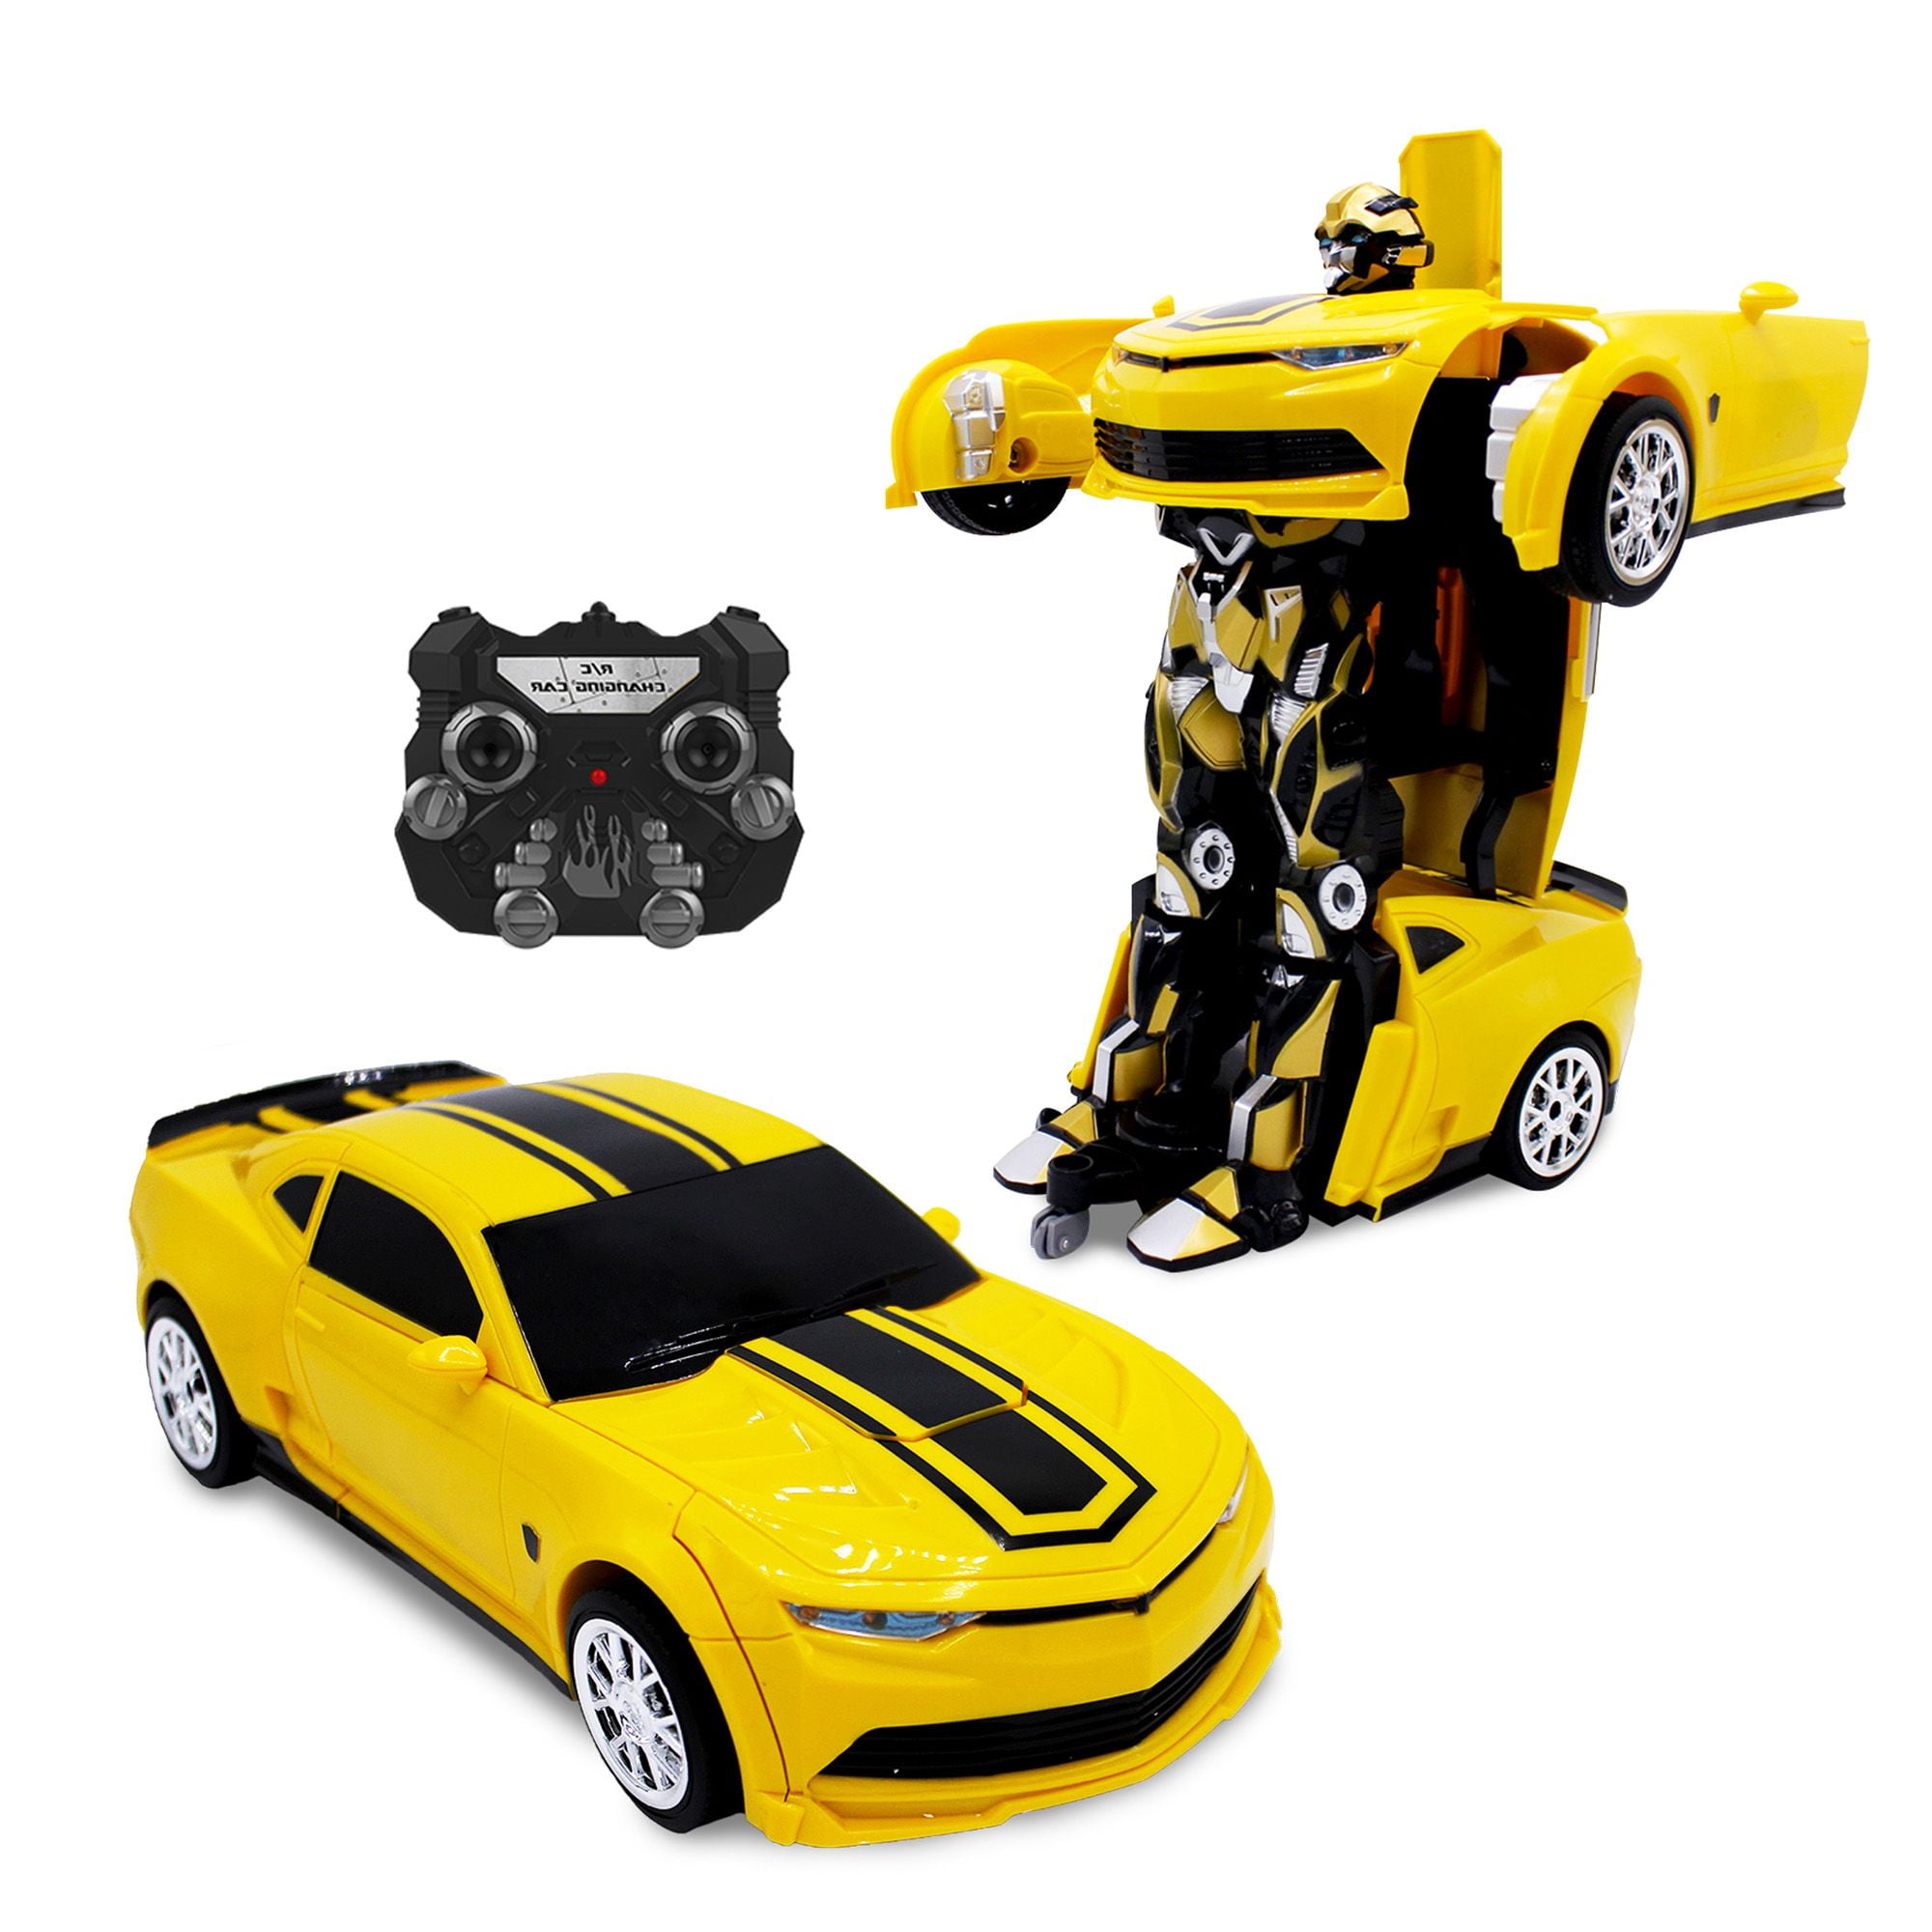 Kids Toys Transformer RC Robot Toy Yellow Model Car Remote Control Car Cool Gift 